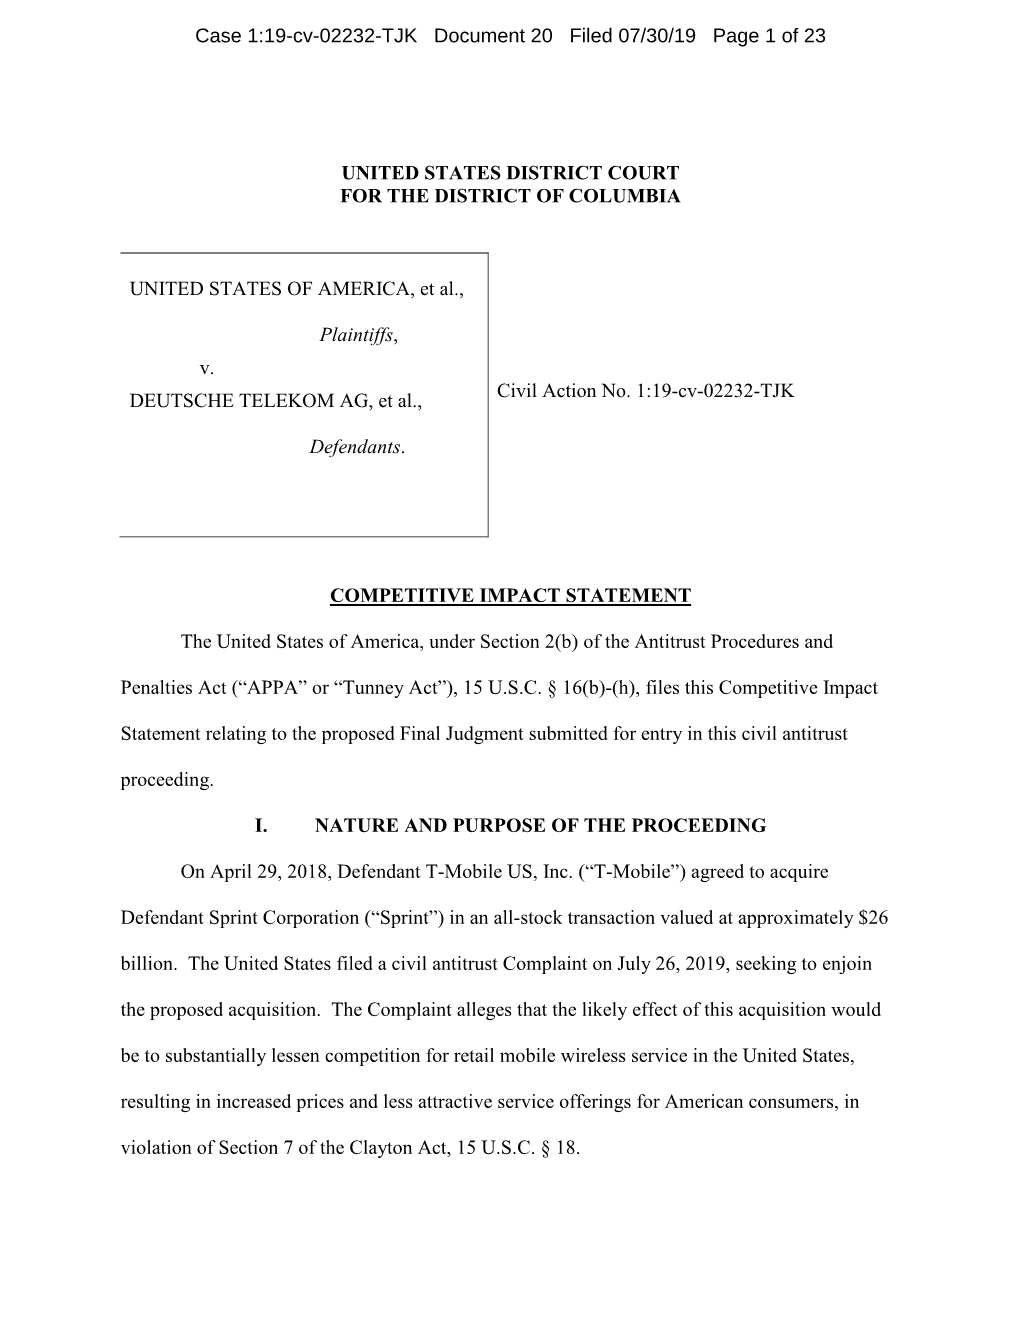 Case 1:19-Cv-02232-TJK Document 20 Filed 07/30/19 Page 1 of 23